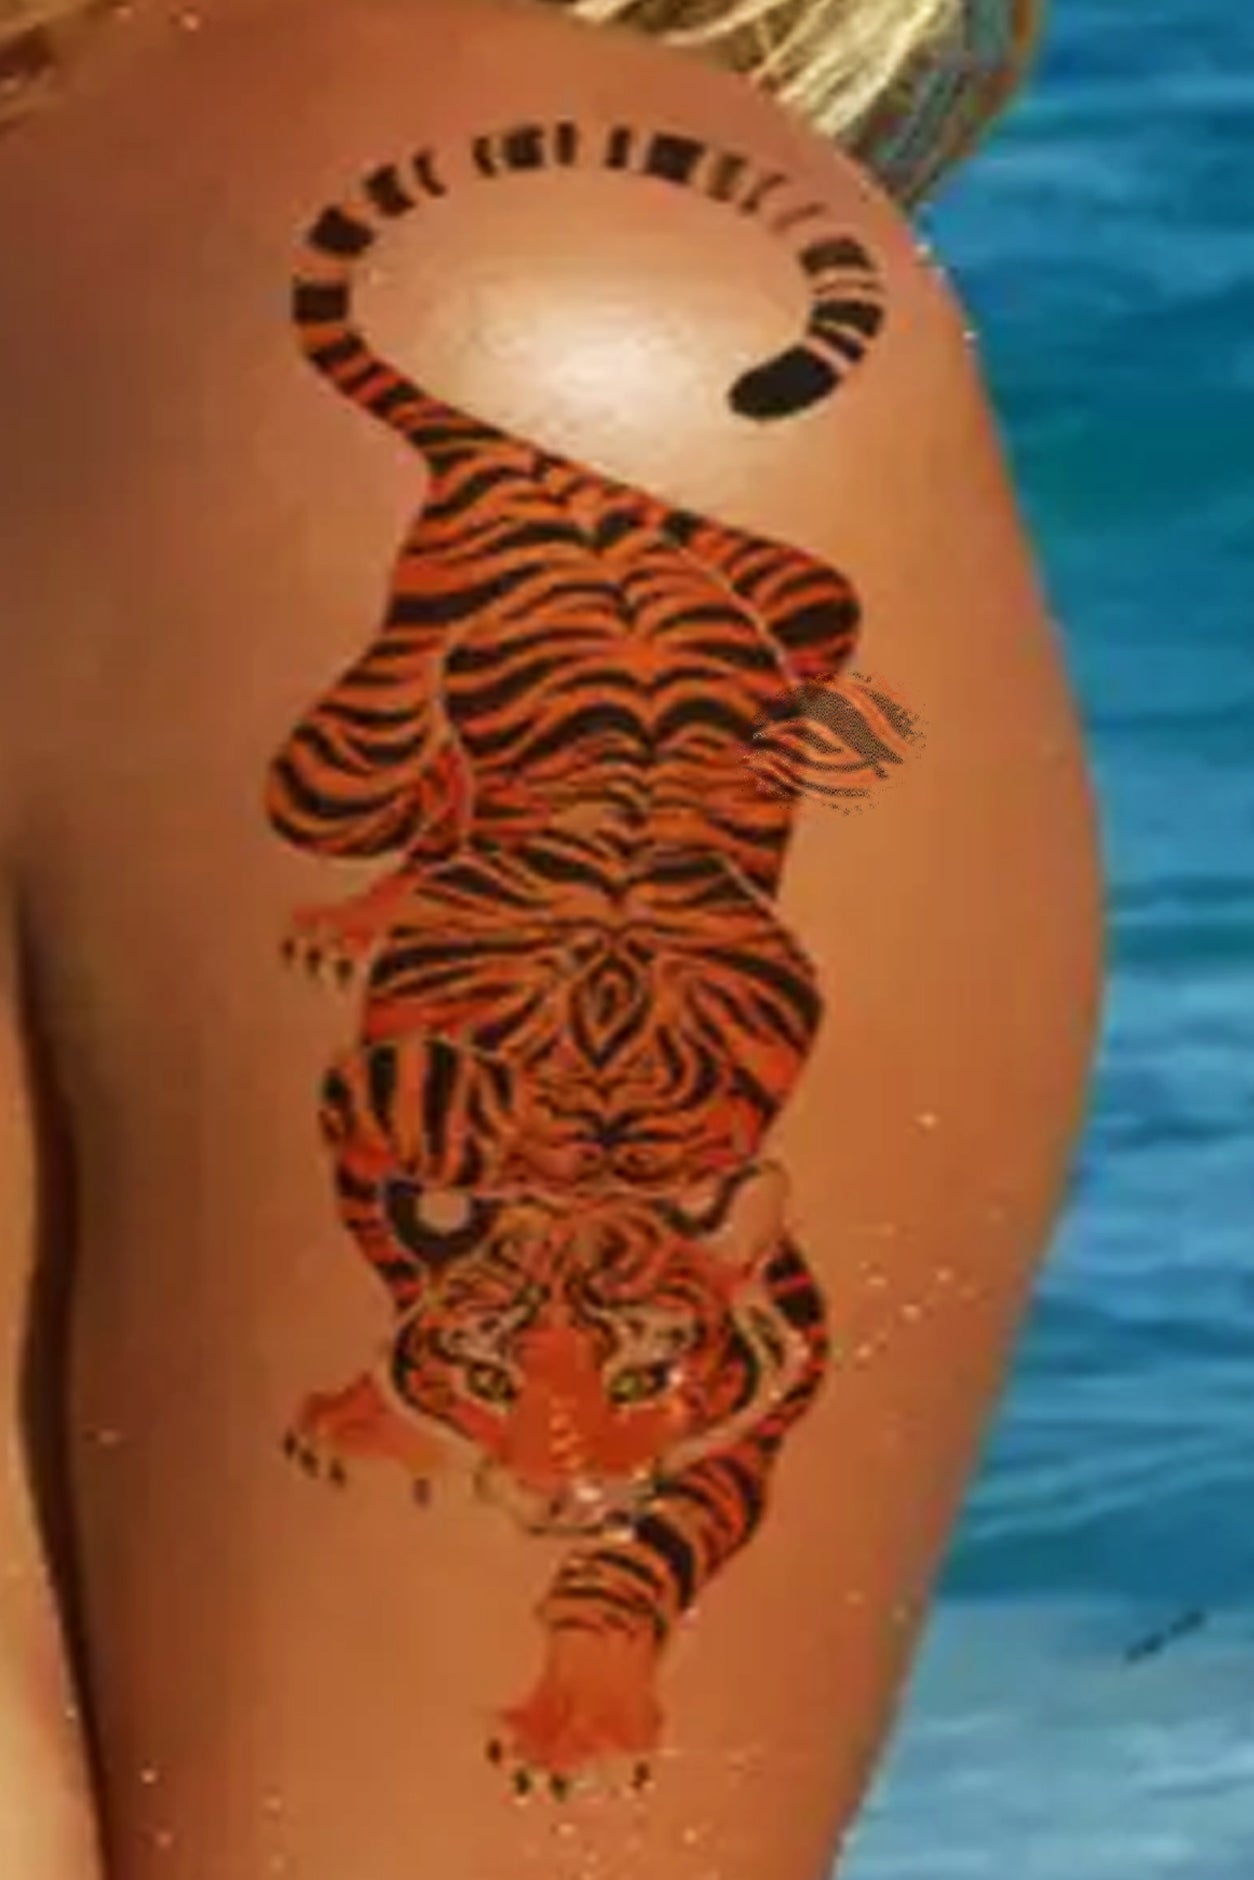 A gender-neutral arm displays the orange tiger. Big orange tigers are a sign of peace, harmony, and balance that compliments vacation time or a personal spirit in life. This full-body cat is slinking along, ready to pounce on prey with claws out. 